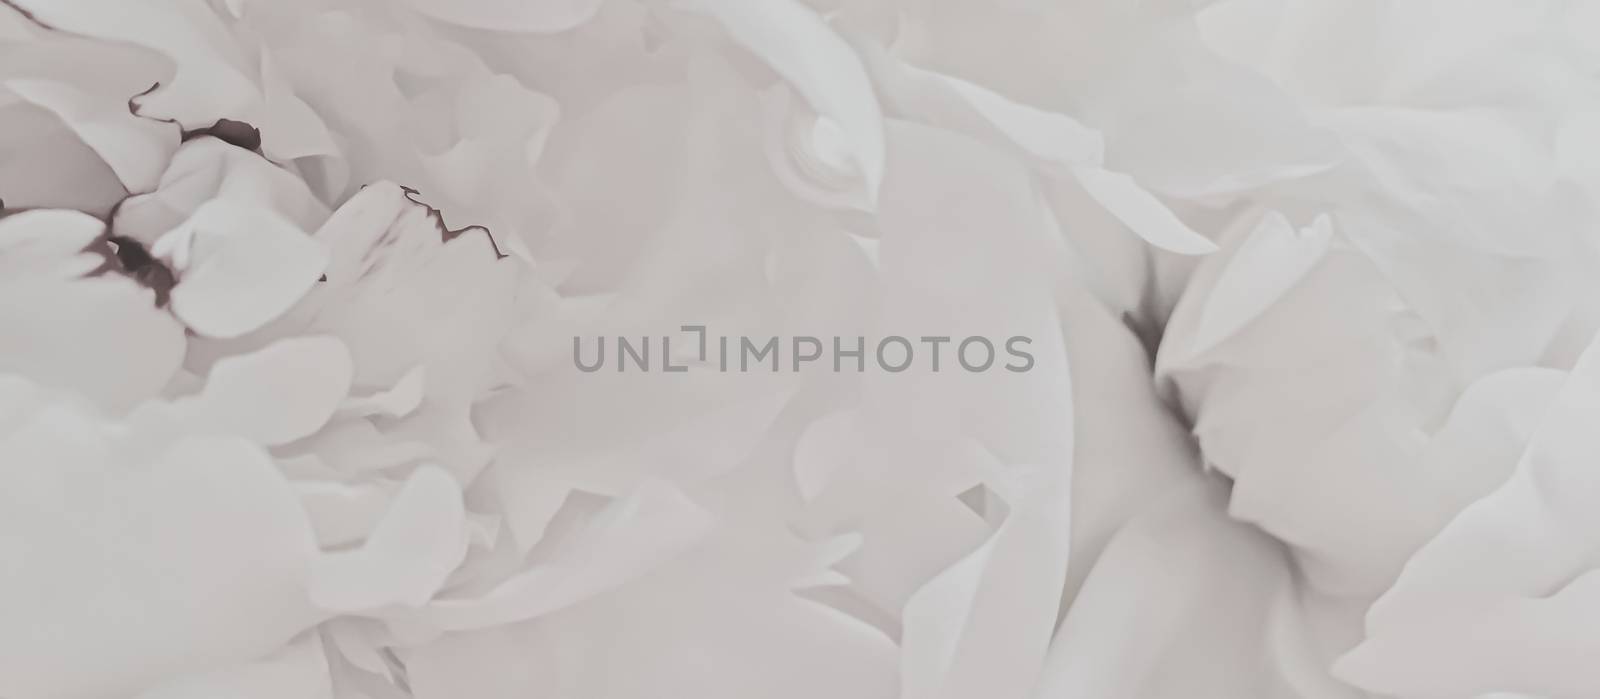 White peony flower as abstract floral background for holiday branding design